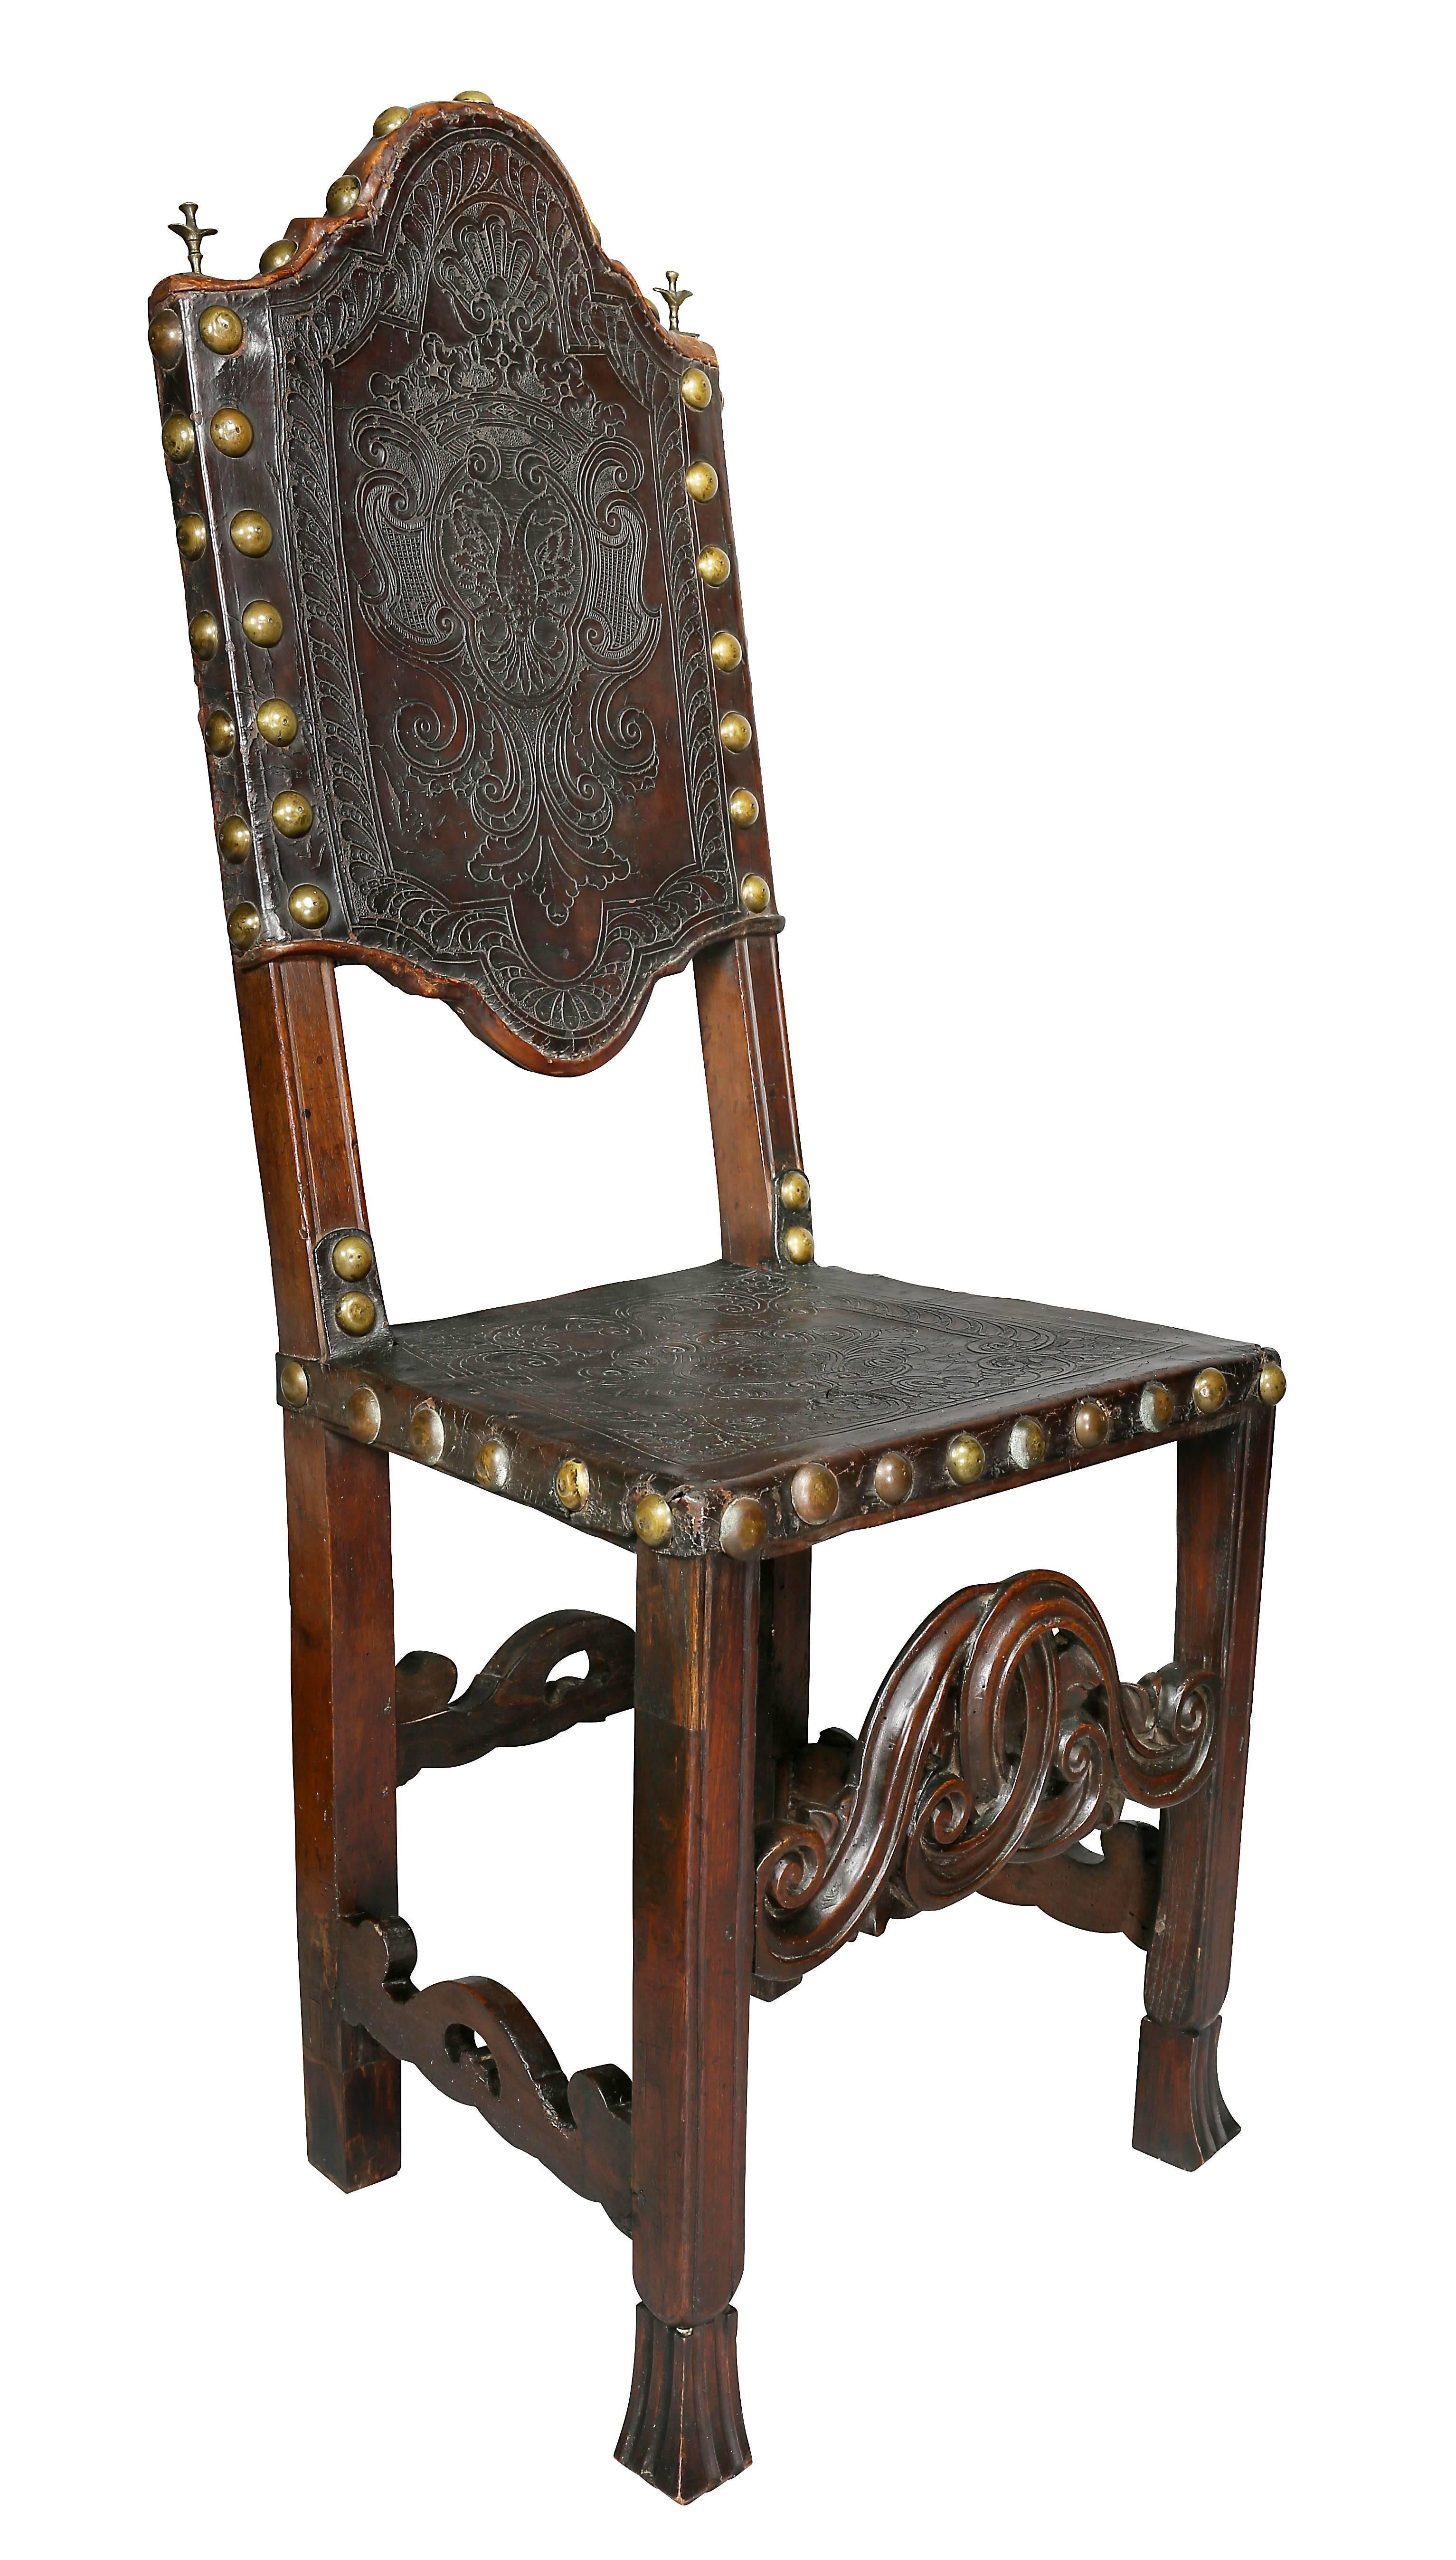 Each with arched embossed leather backs and square seats raised on molded legs with carved stretchers.